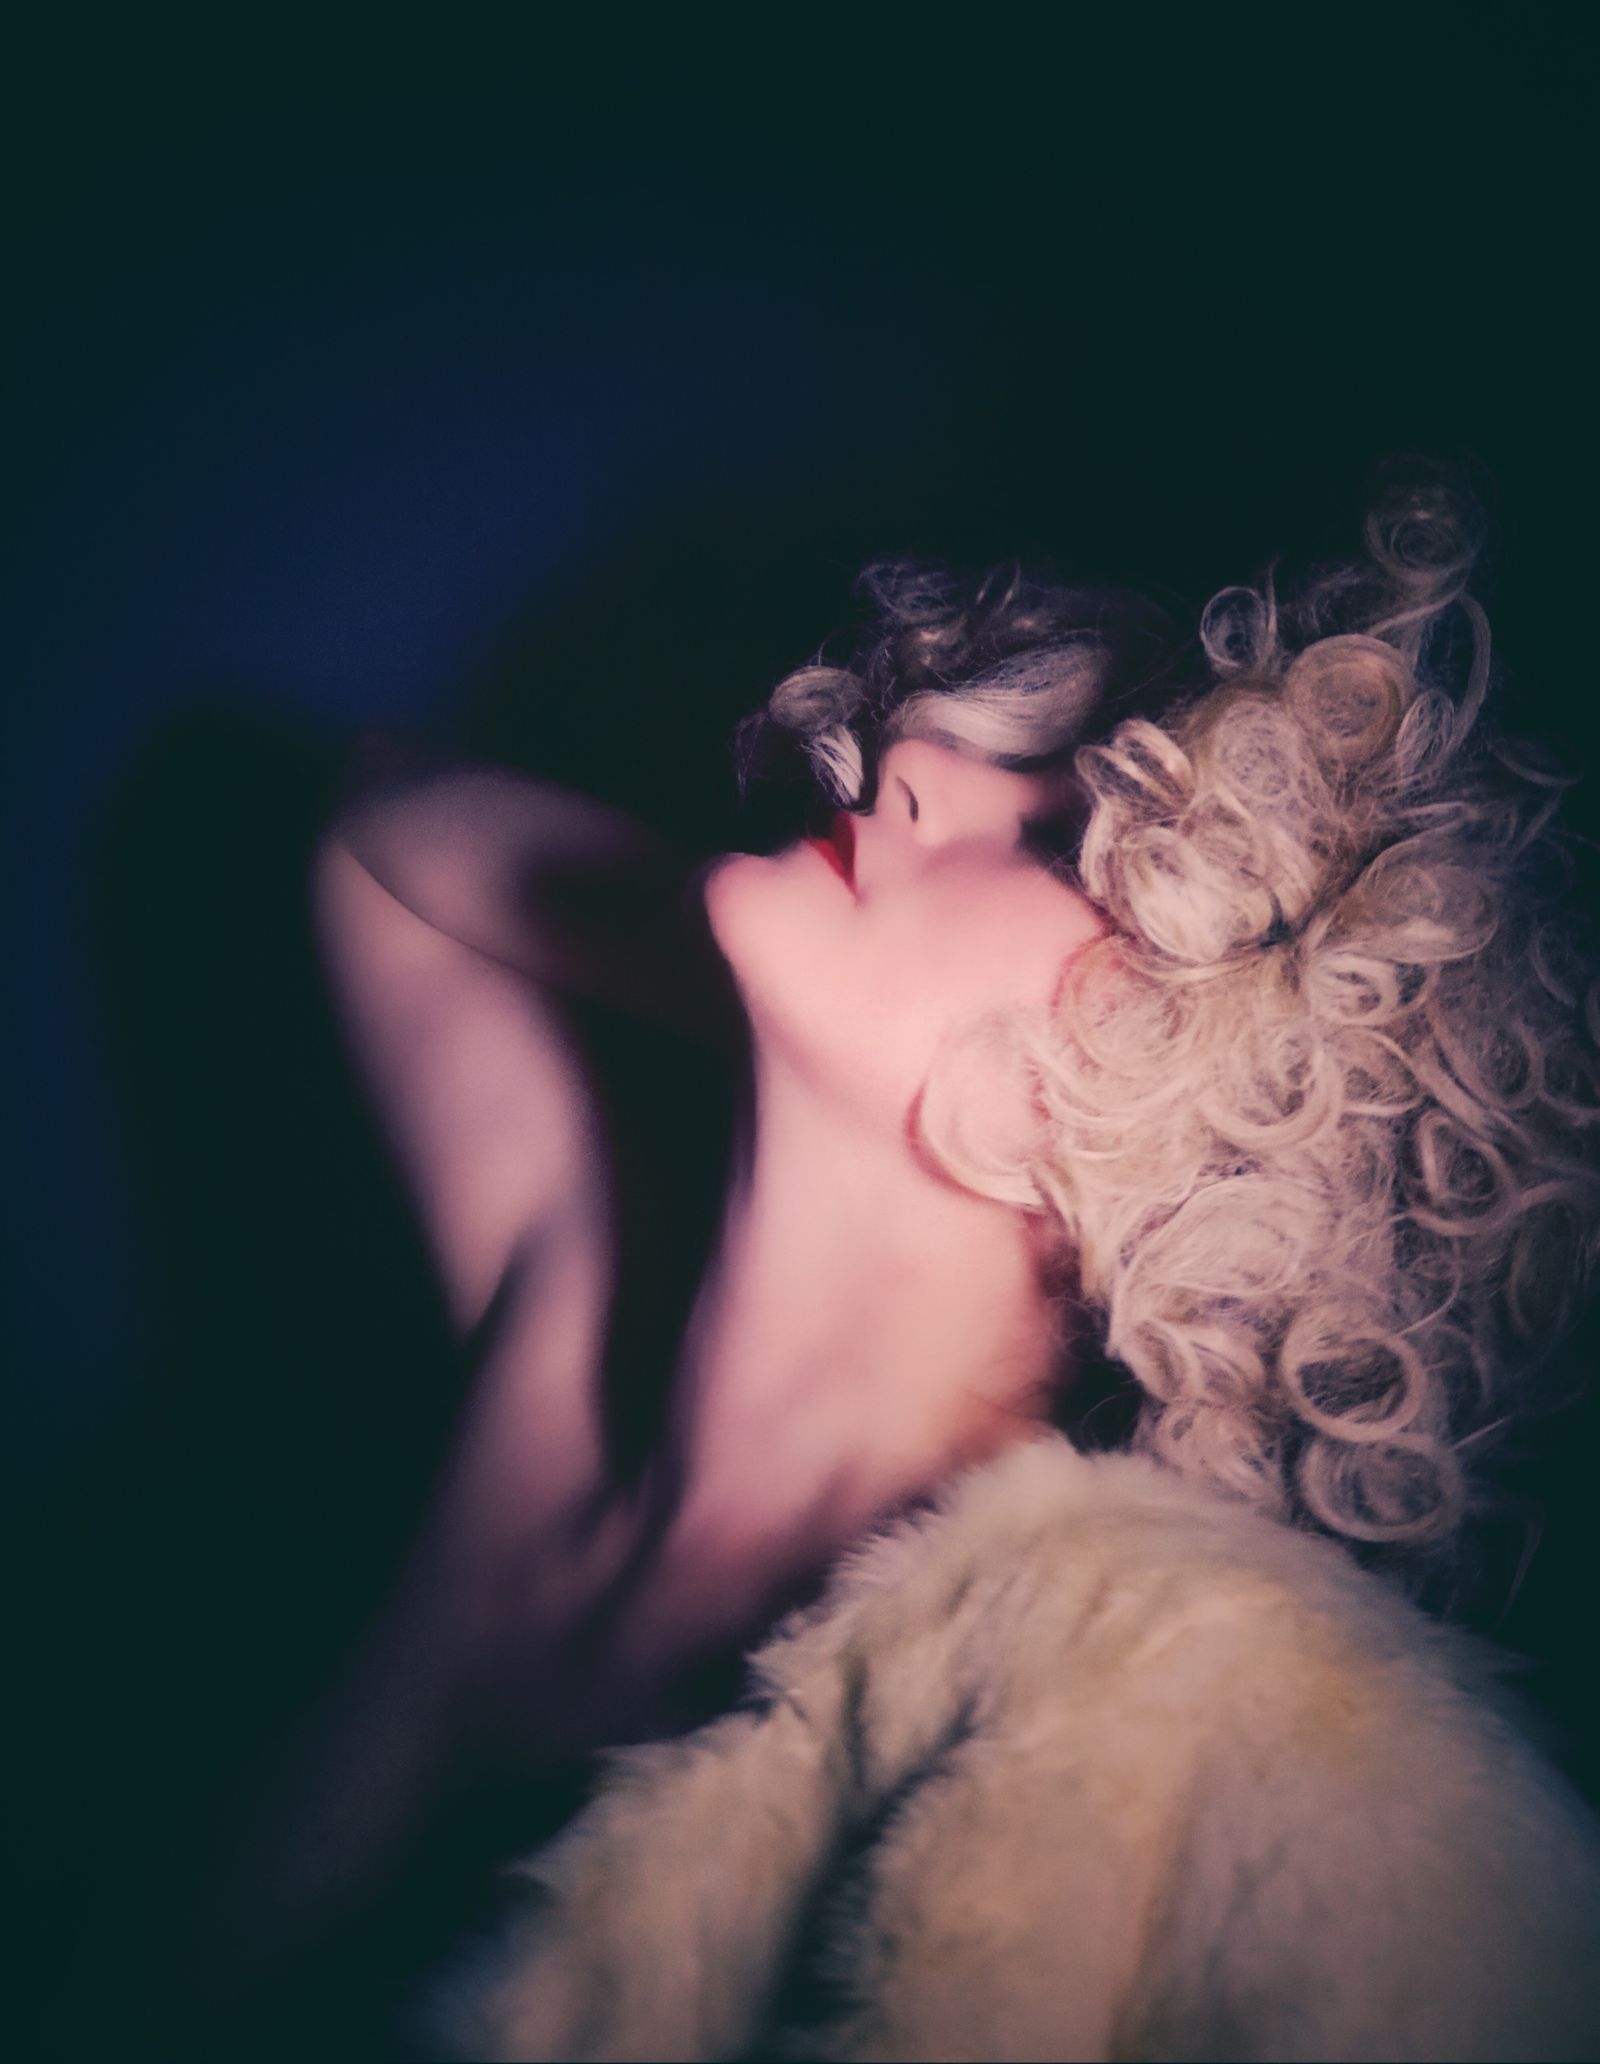 © Heather Joy Layton - Image from the Women I've Known photography project